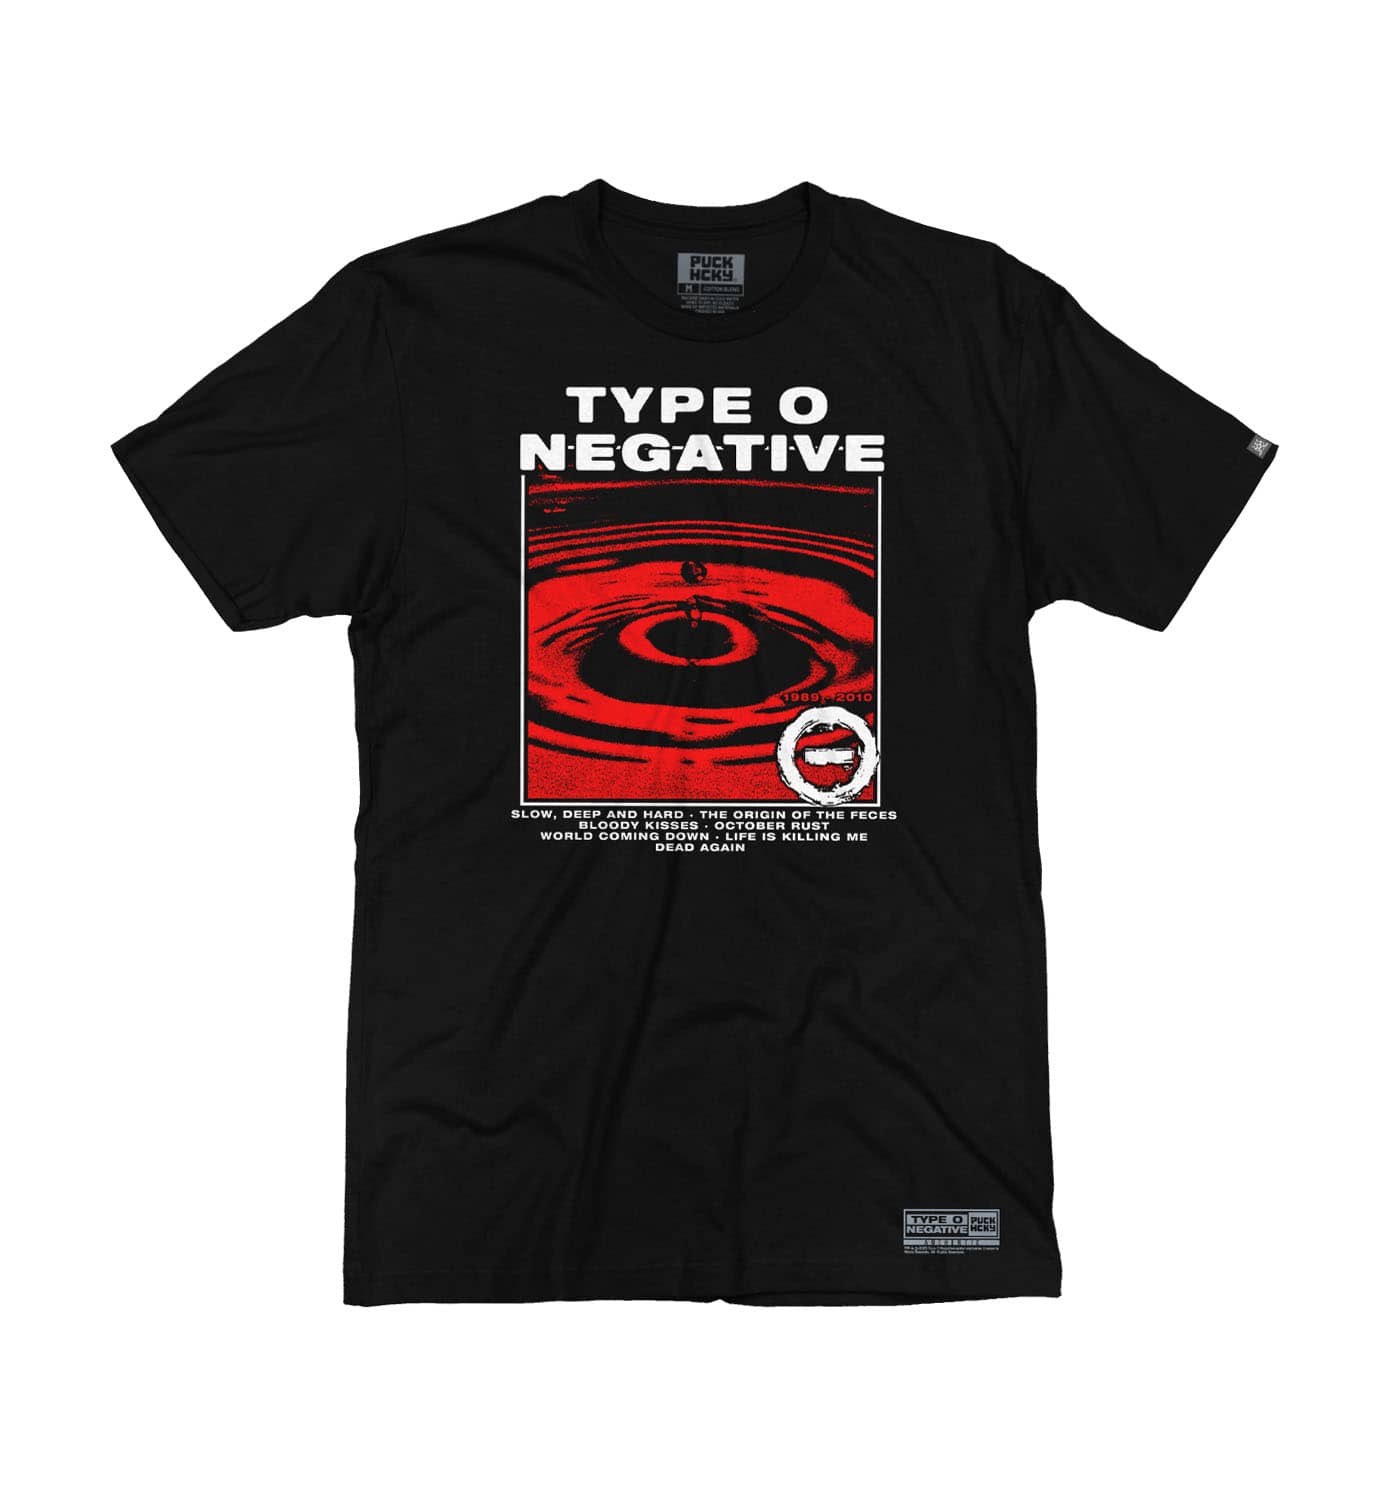 TYPE O NEGATIVE 'DISCOG' short sleeve hockey t-shirt in black front view